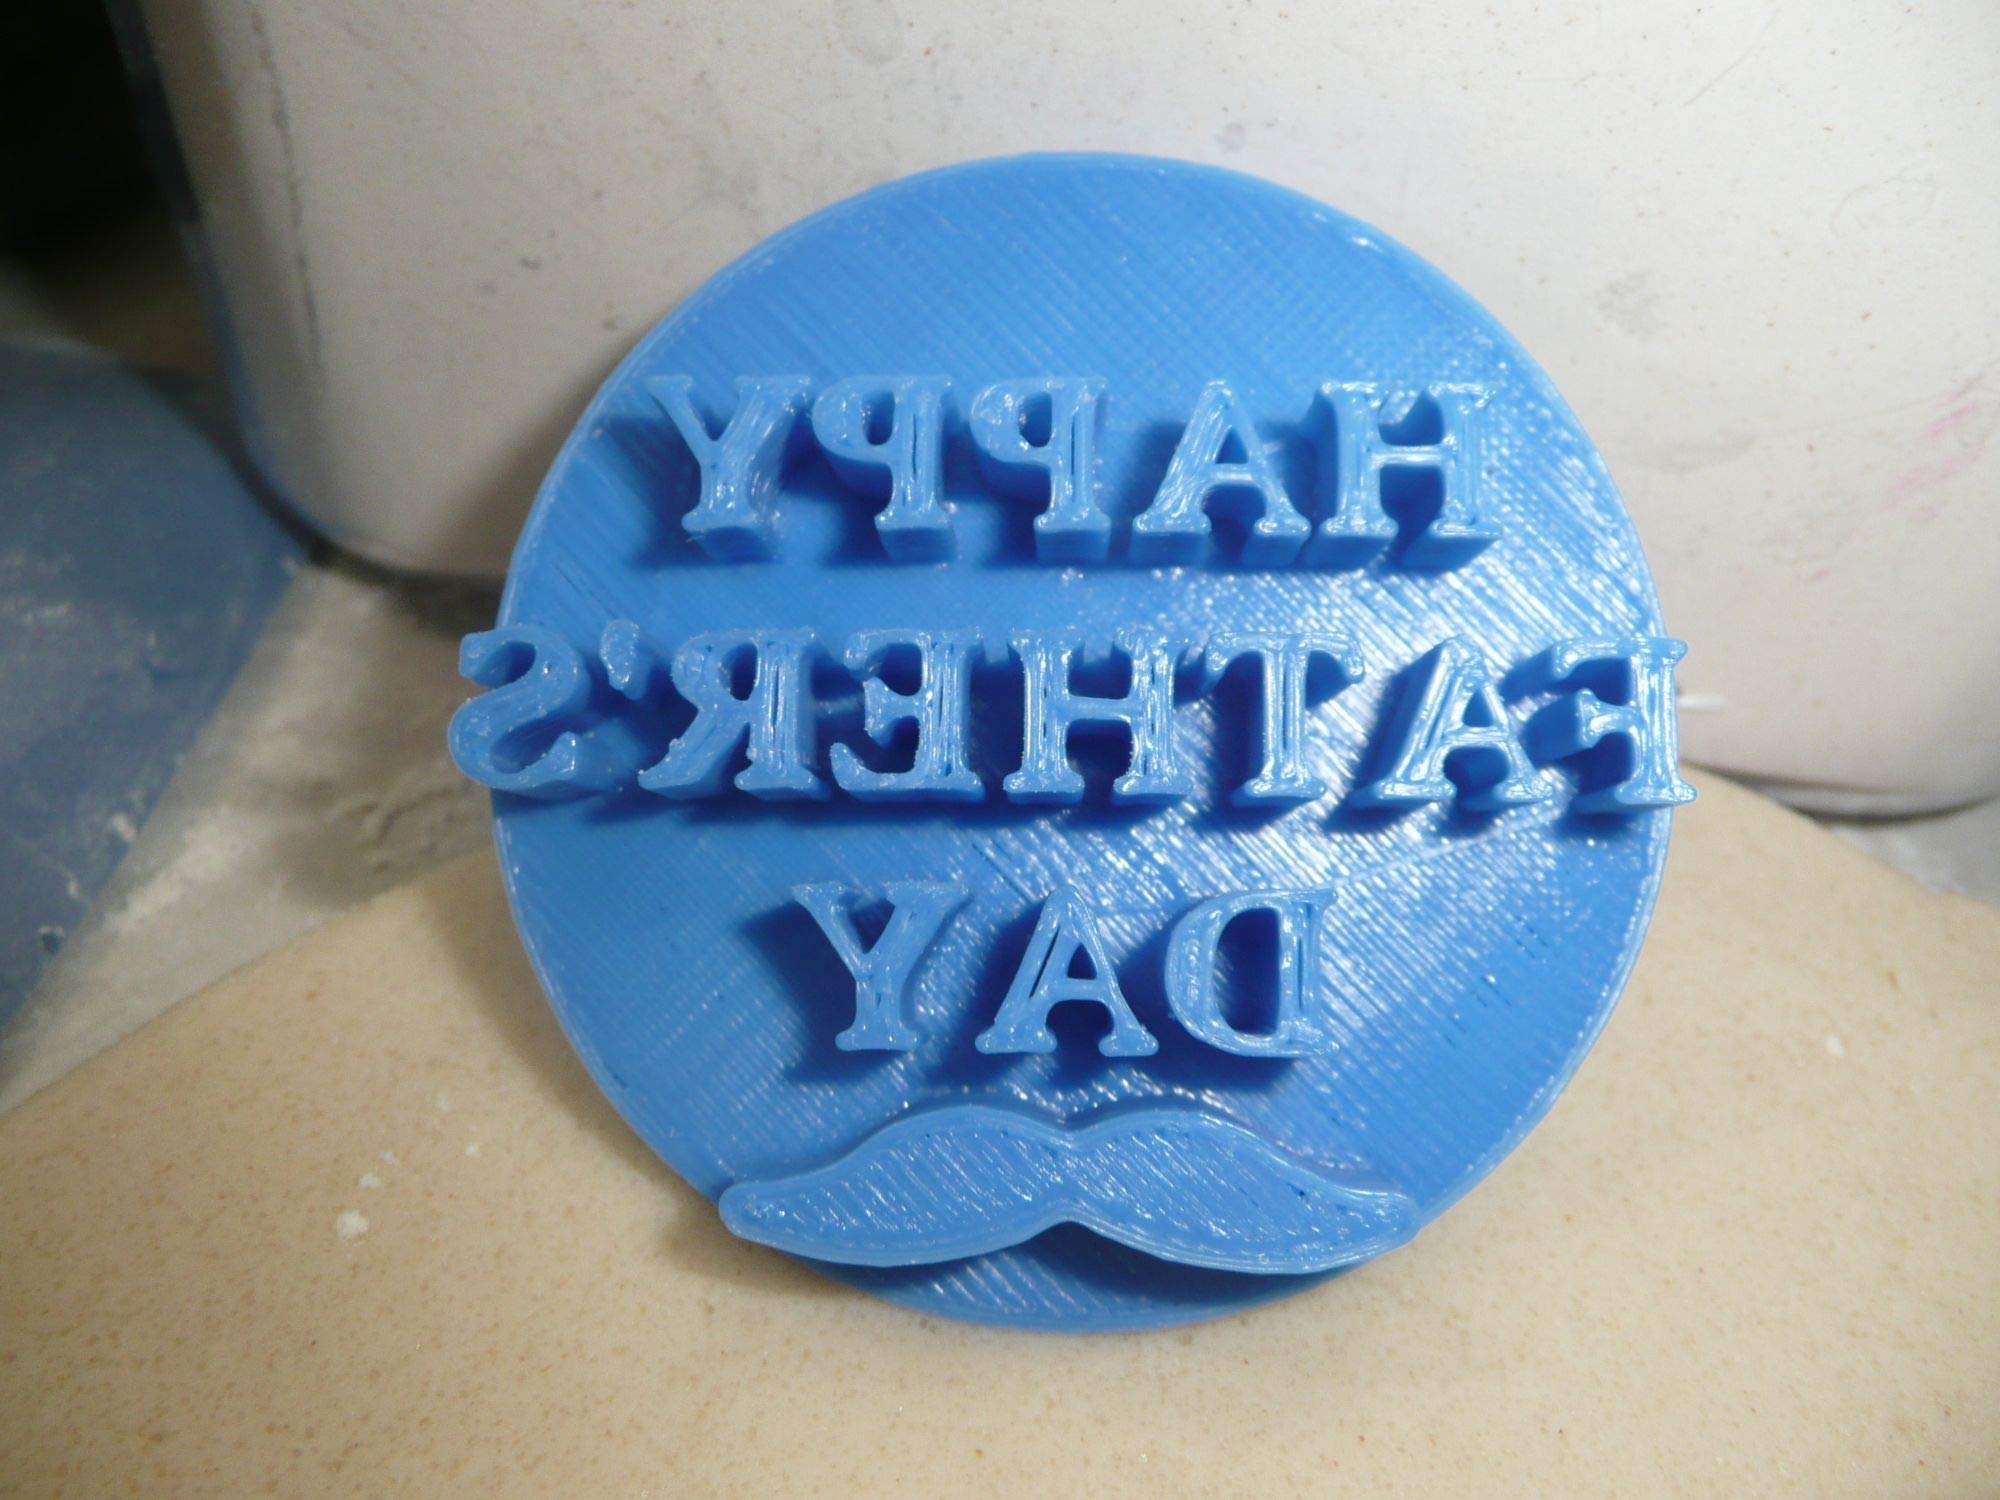 YNGLLC HAPPY FATHERS DAY WORDS WITH MUSTACHE BLOCK FONT COOKIE STAMP EMBOSSER BAKING TOOL 3D PRINTED MADE IN USA PR4196, Blue